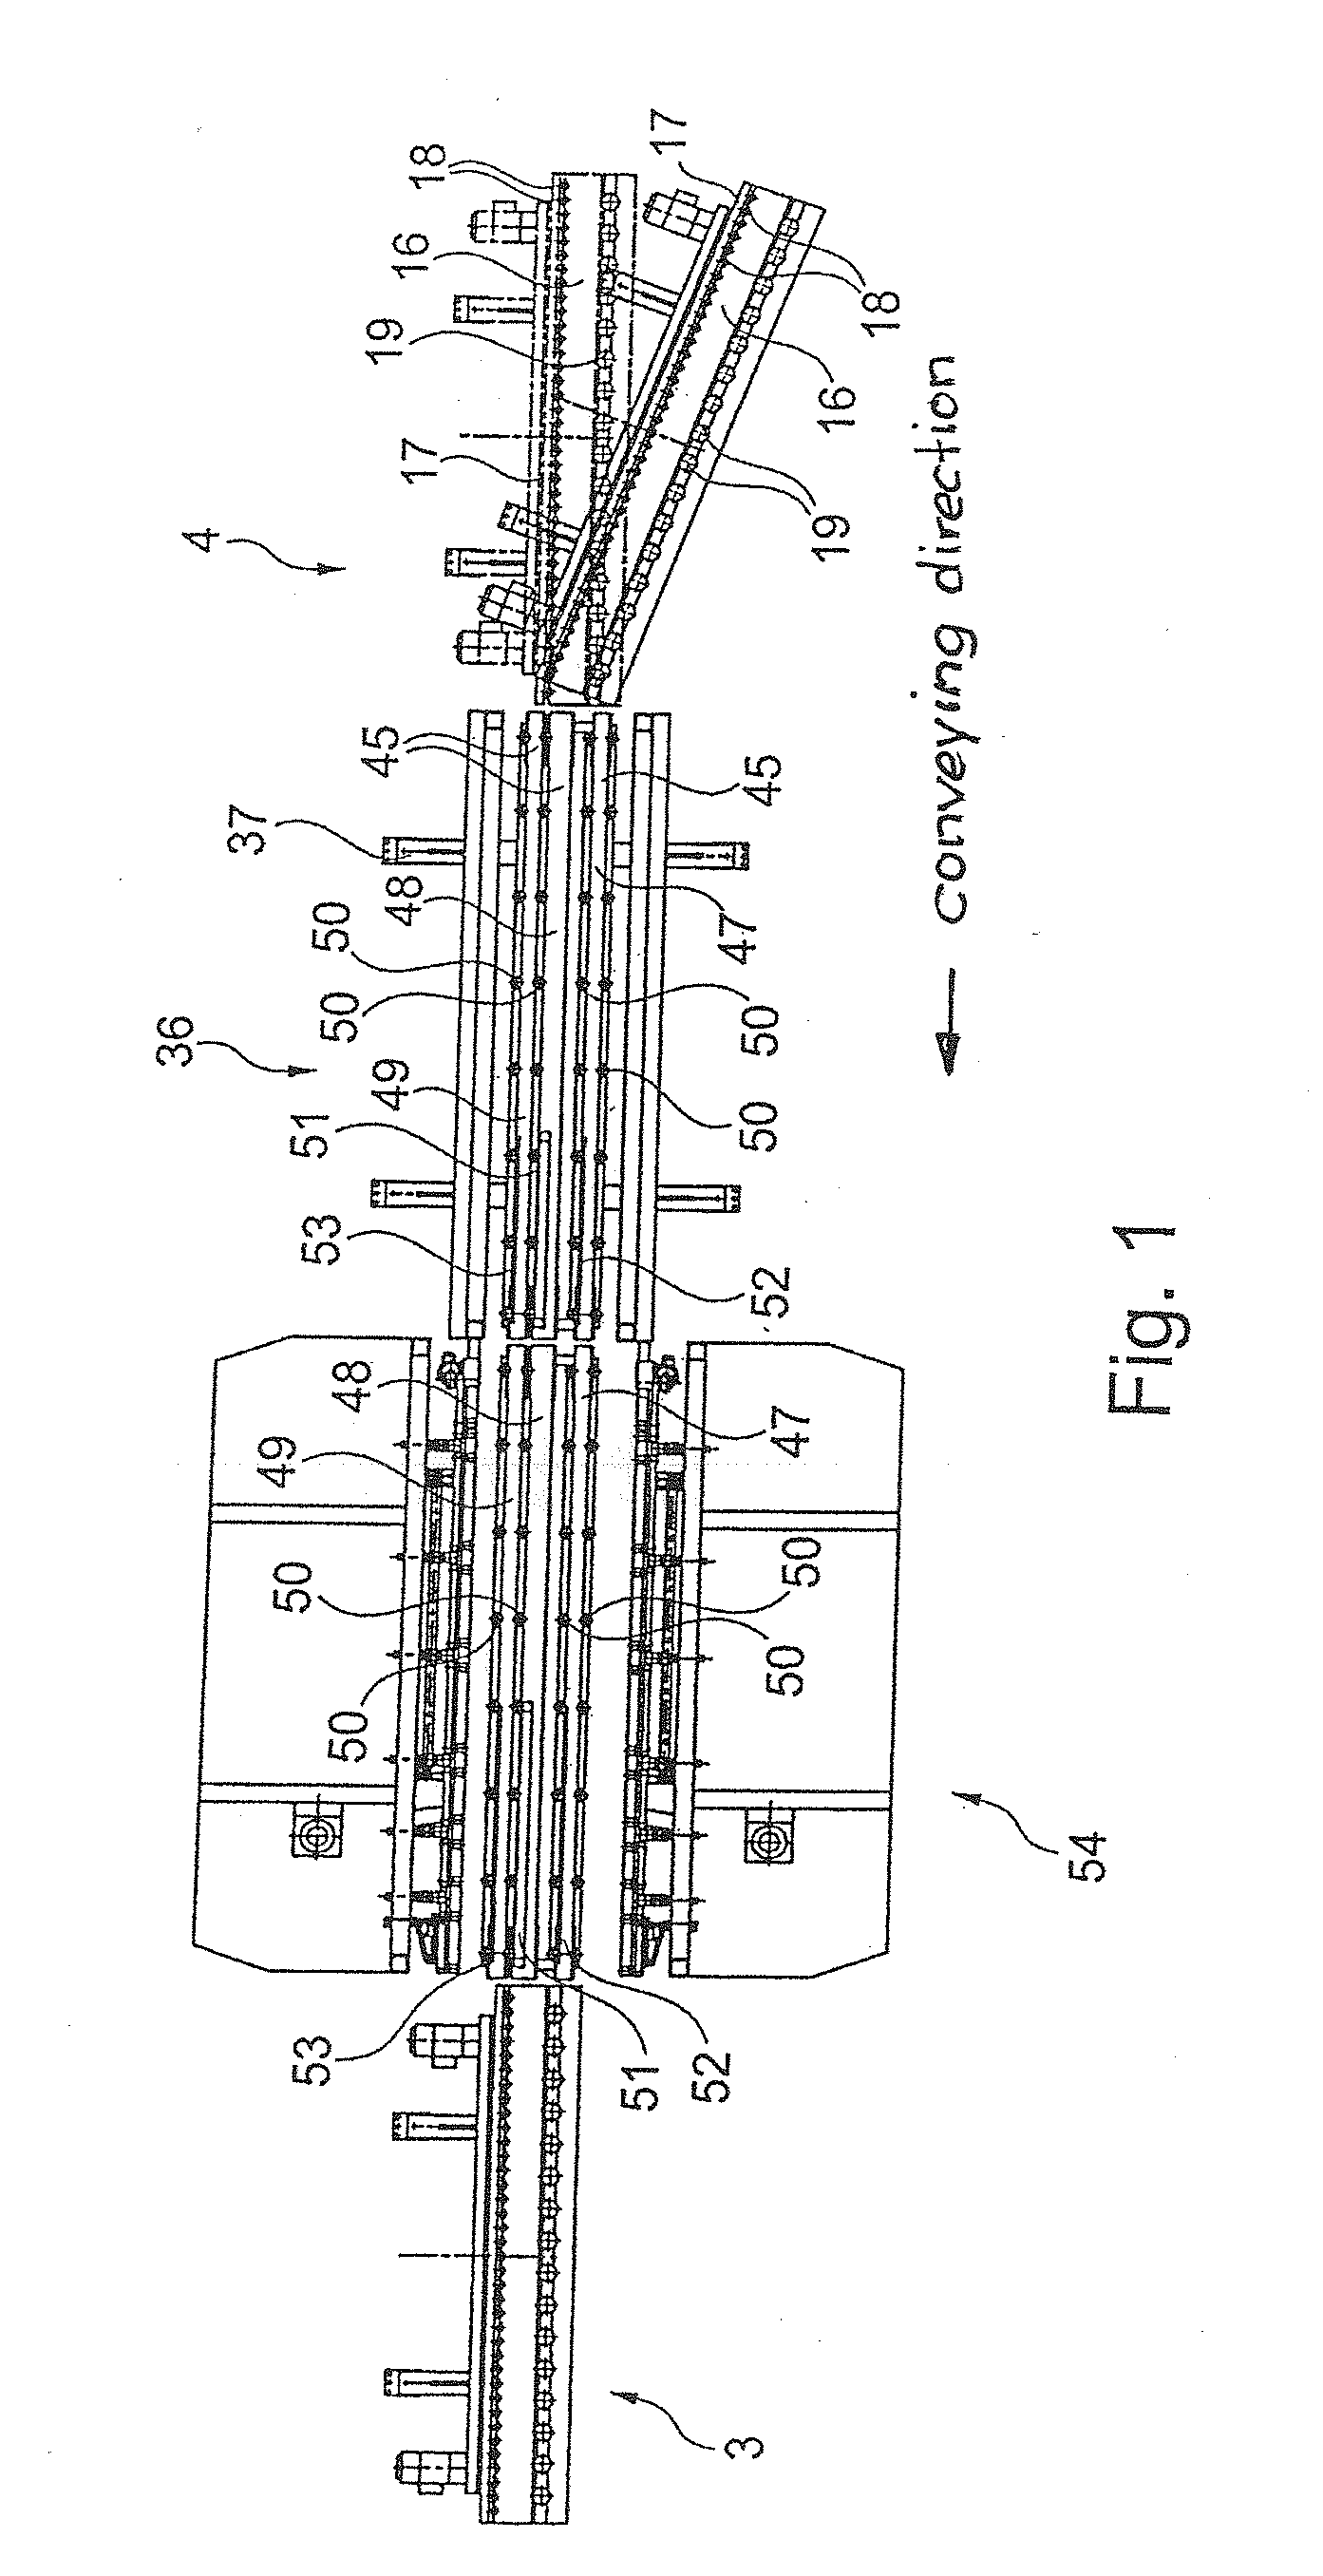 Device for assembling a window sash having an integrated insulating glass pane